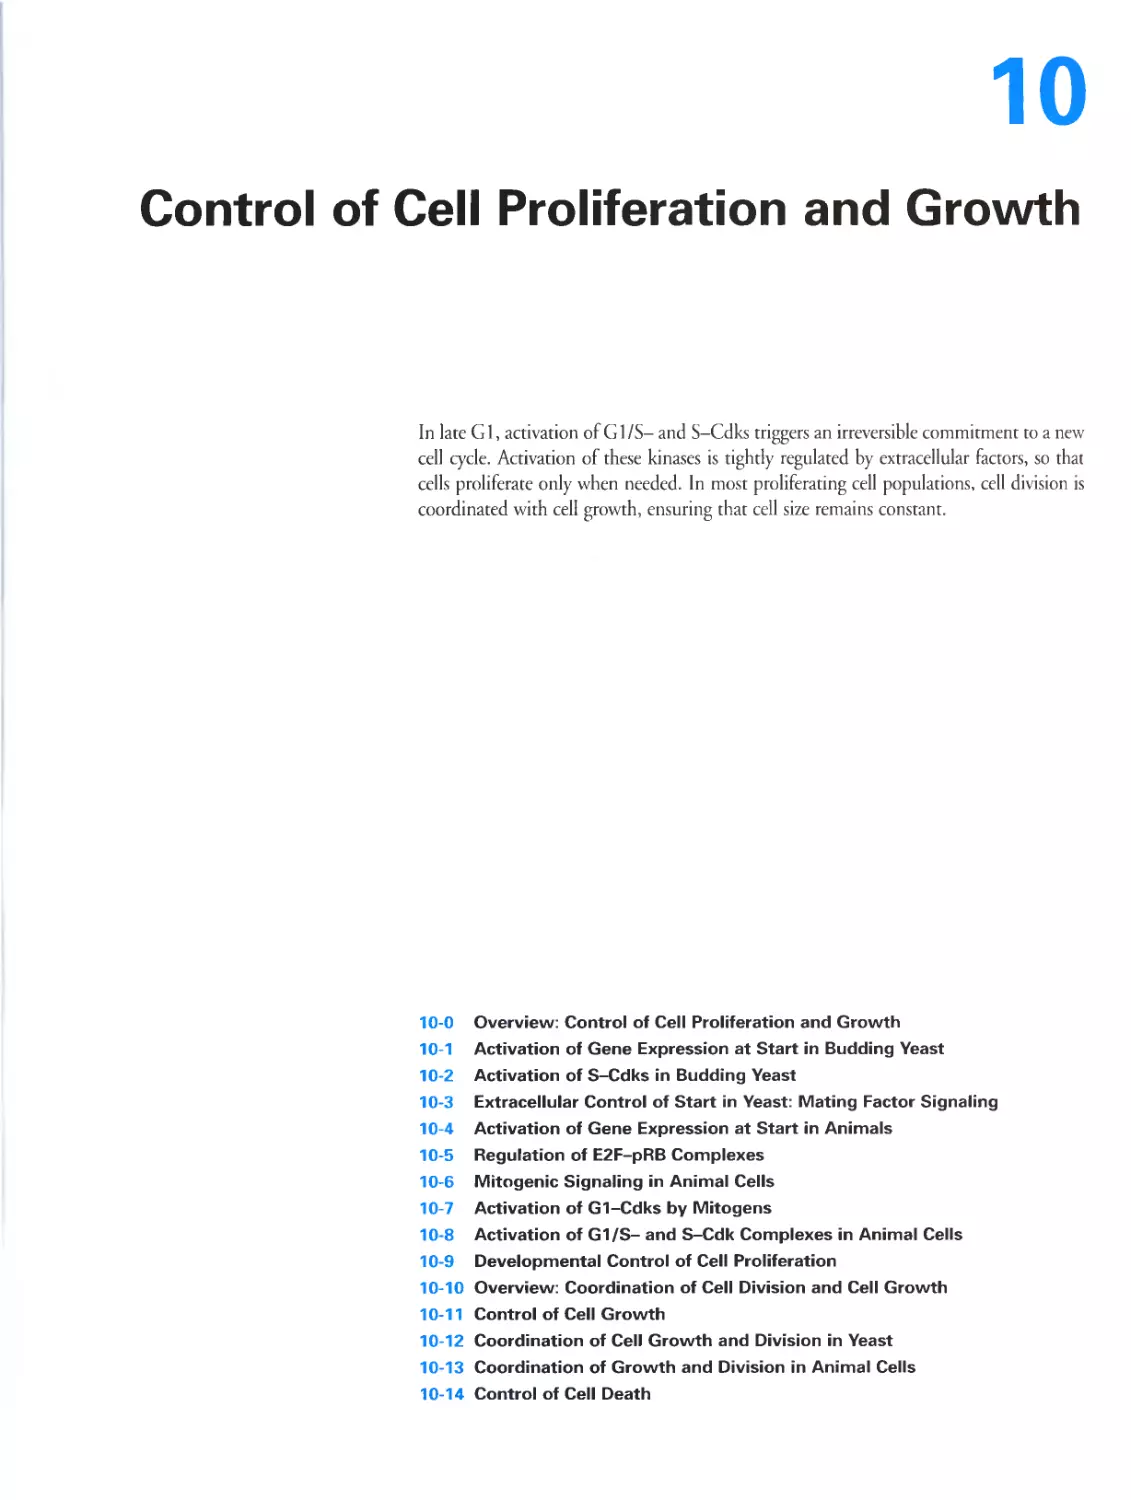 Chapter 10. Control of Cell Proliferation and Growth